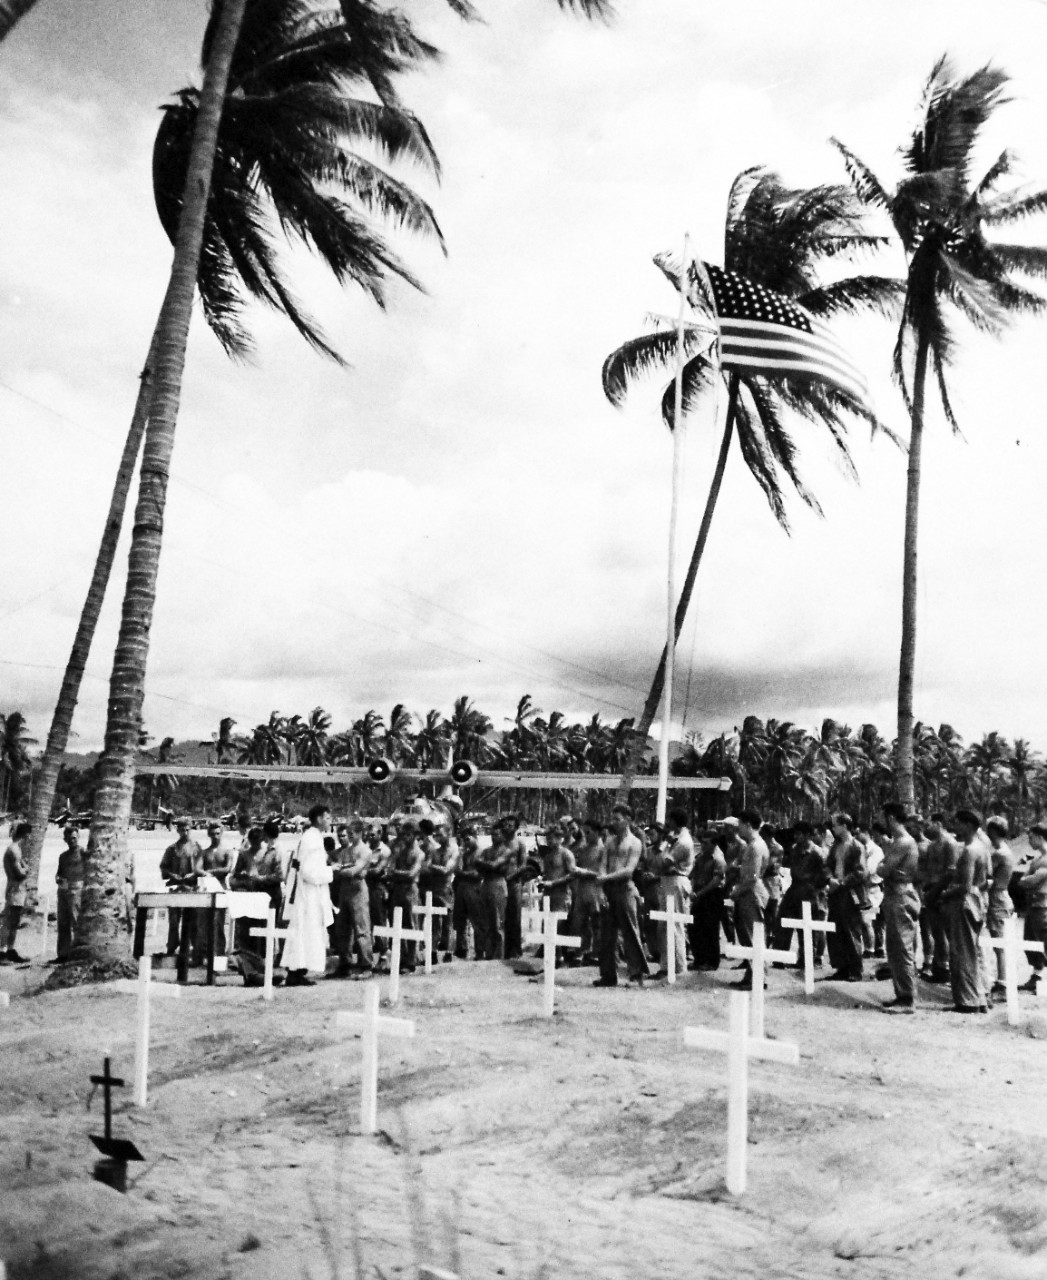 80-G-207845:  Bougainville Campaign, November 1943-August 1945.   Men attend memorial services for their buddies, members of U.S. Marine Corps and U.S. Navy at cemetery at Bougainville in the Solomon Islands.     Photograph released January 12, 1944.    U.S. Navy photograph, now in the collections of the National Archives.  (2016/06/21).